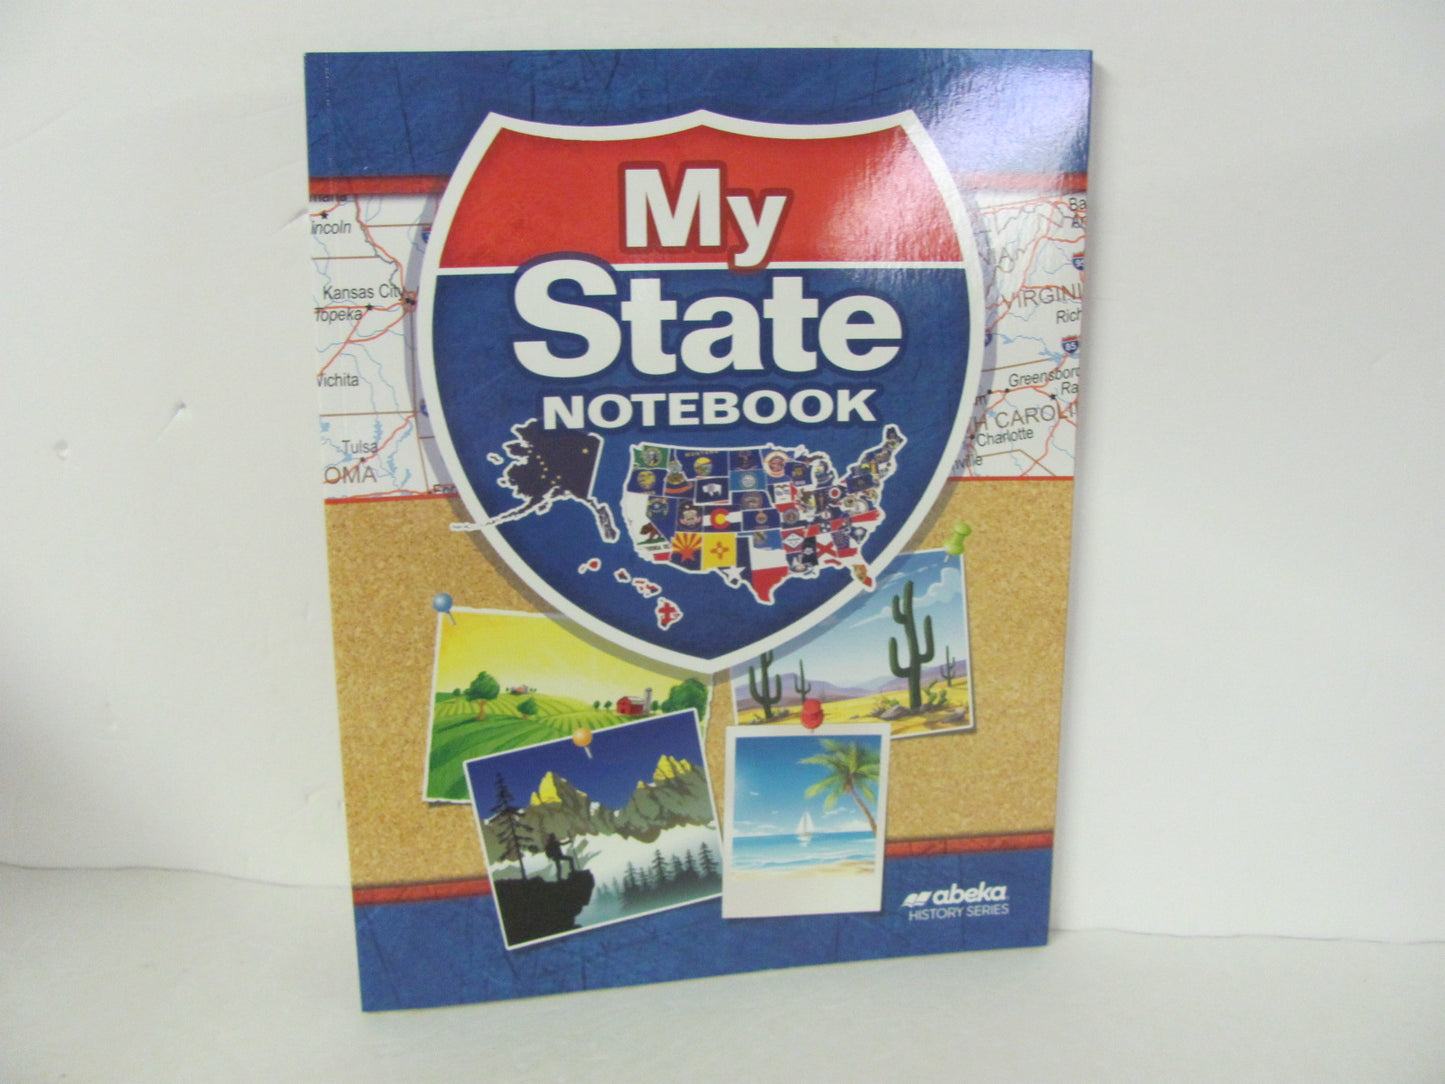 My State Notebook Abeka Student Book Pre-Owned 4th Grade History Textbooks